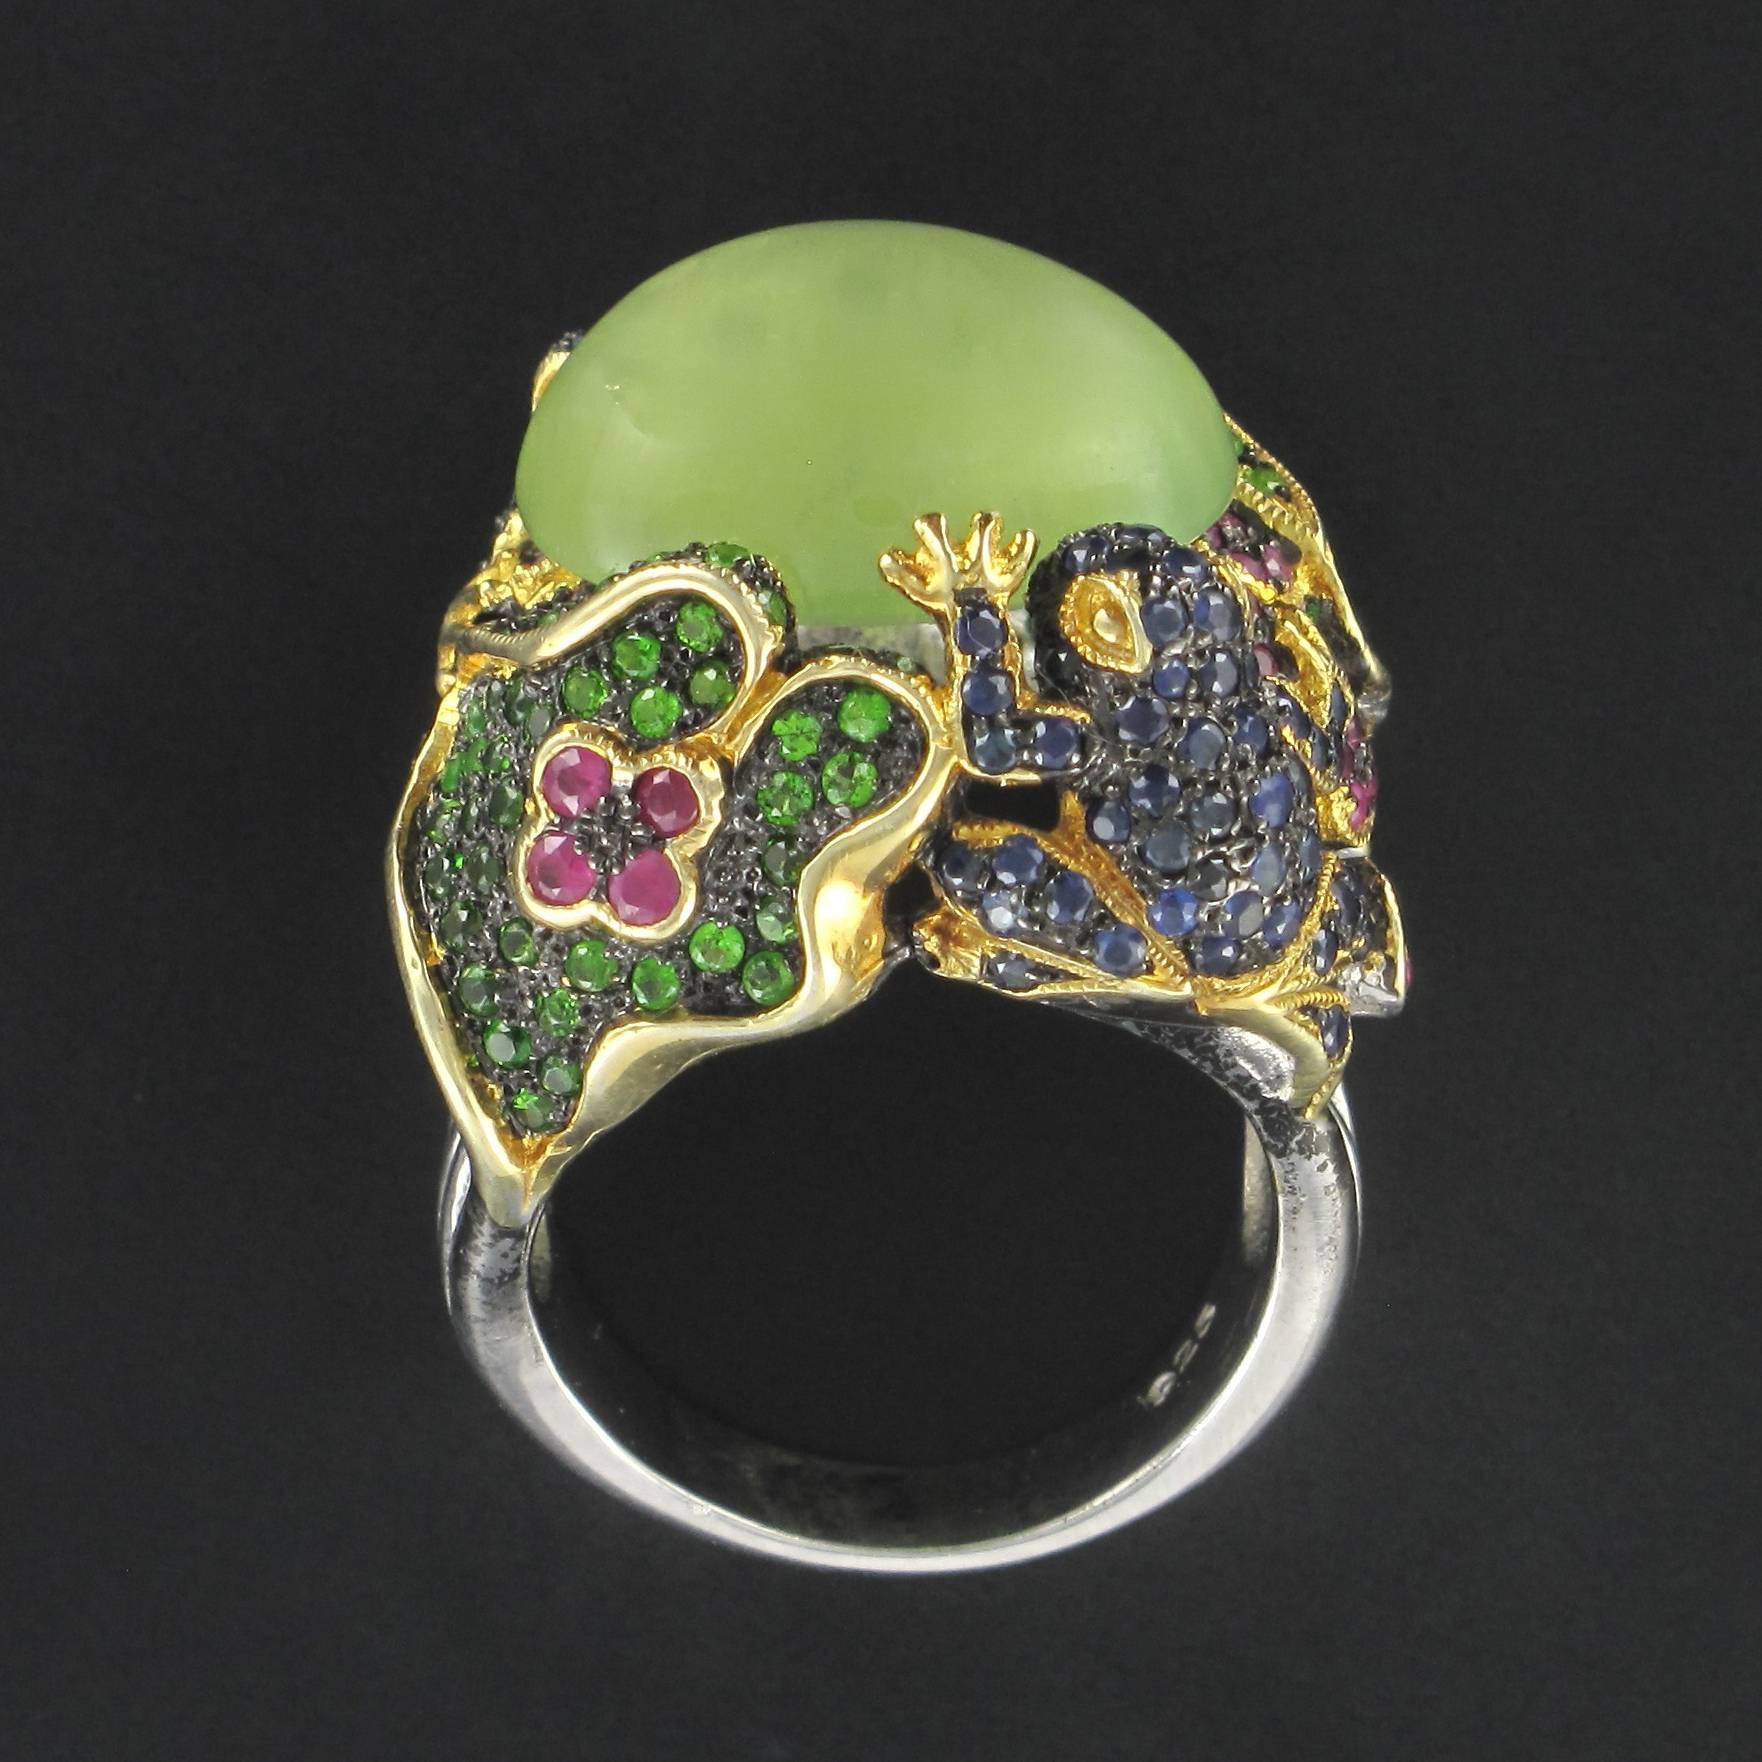 Silver Ring.

This original design ring features a prehnite cabochon held by 2 frogs and 2 water lily pads. The frogs are set with a multitude of tiny round sapphires and the water lily leaves with tsavorite garnets, the lily flowers are set with